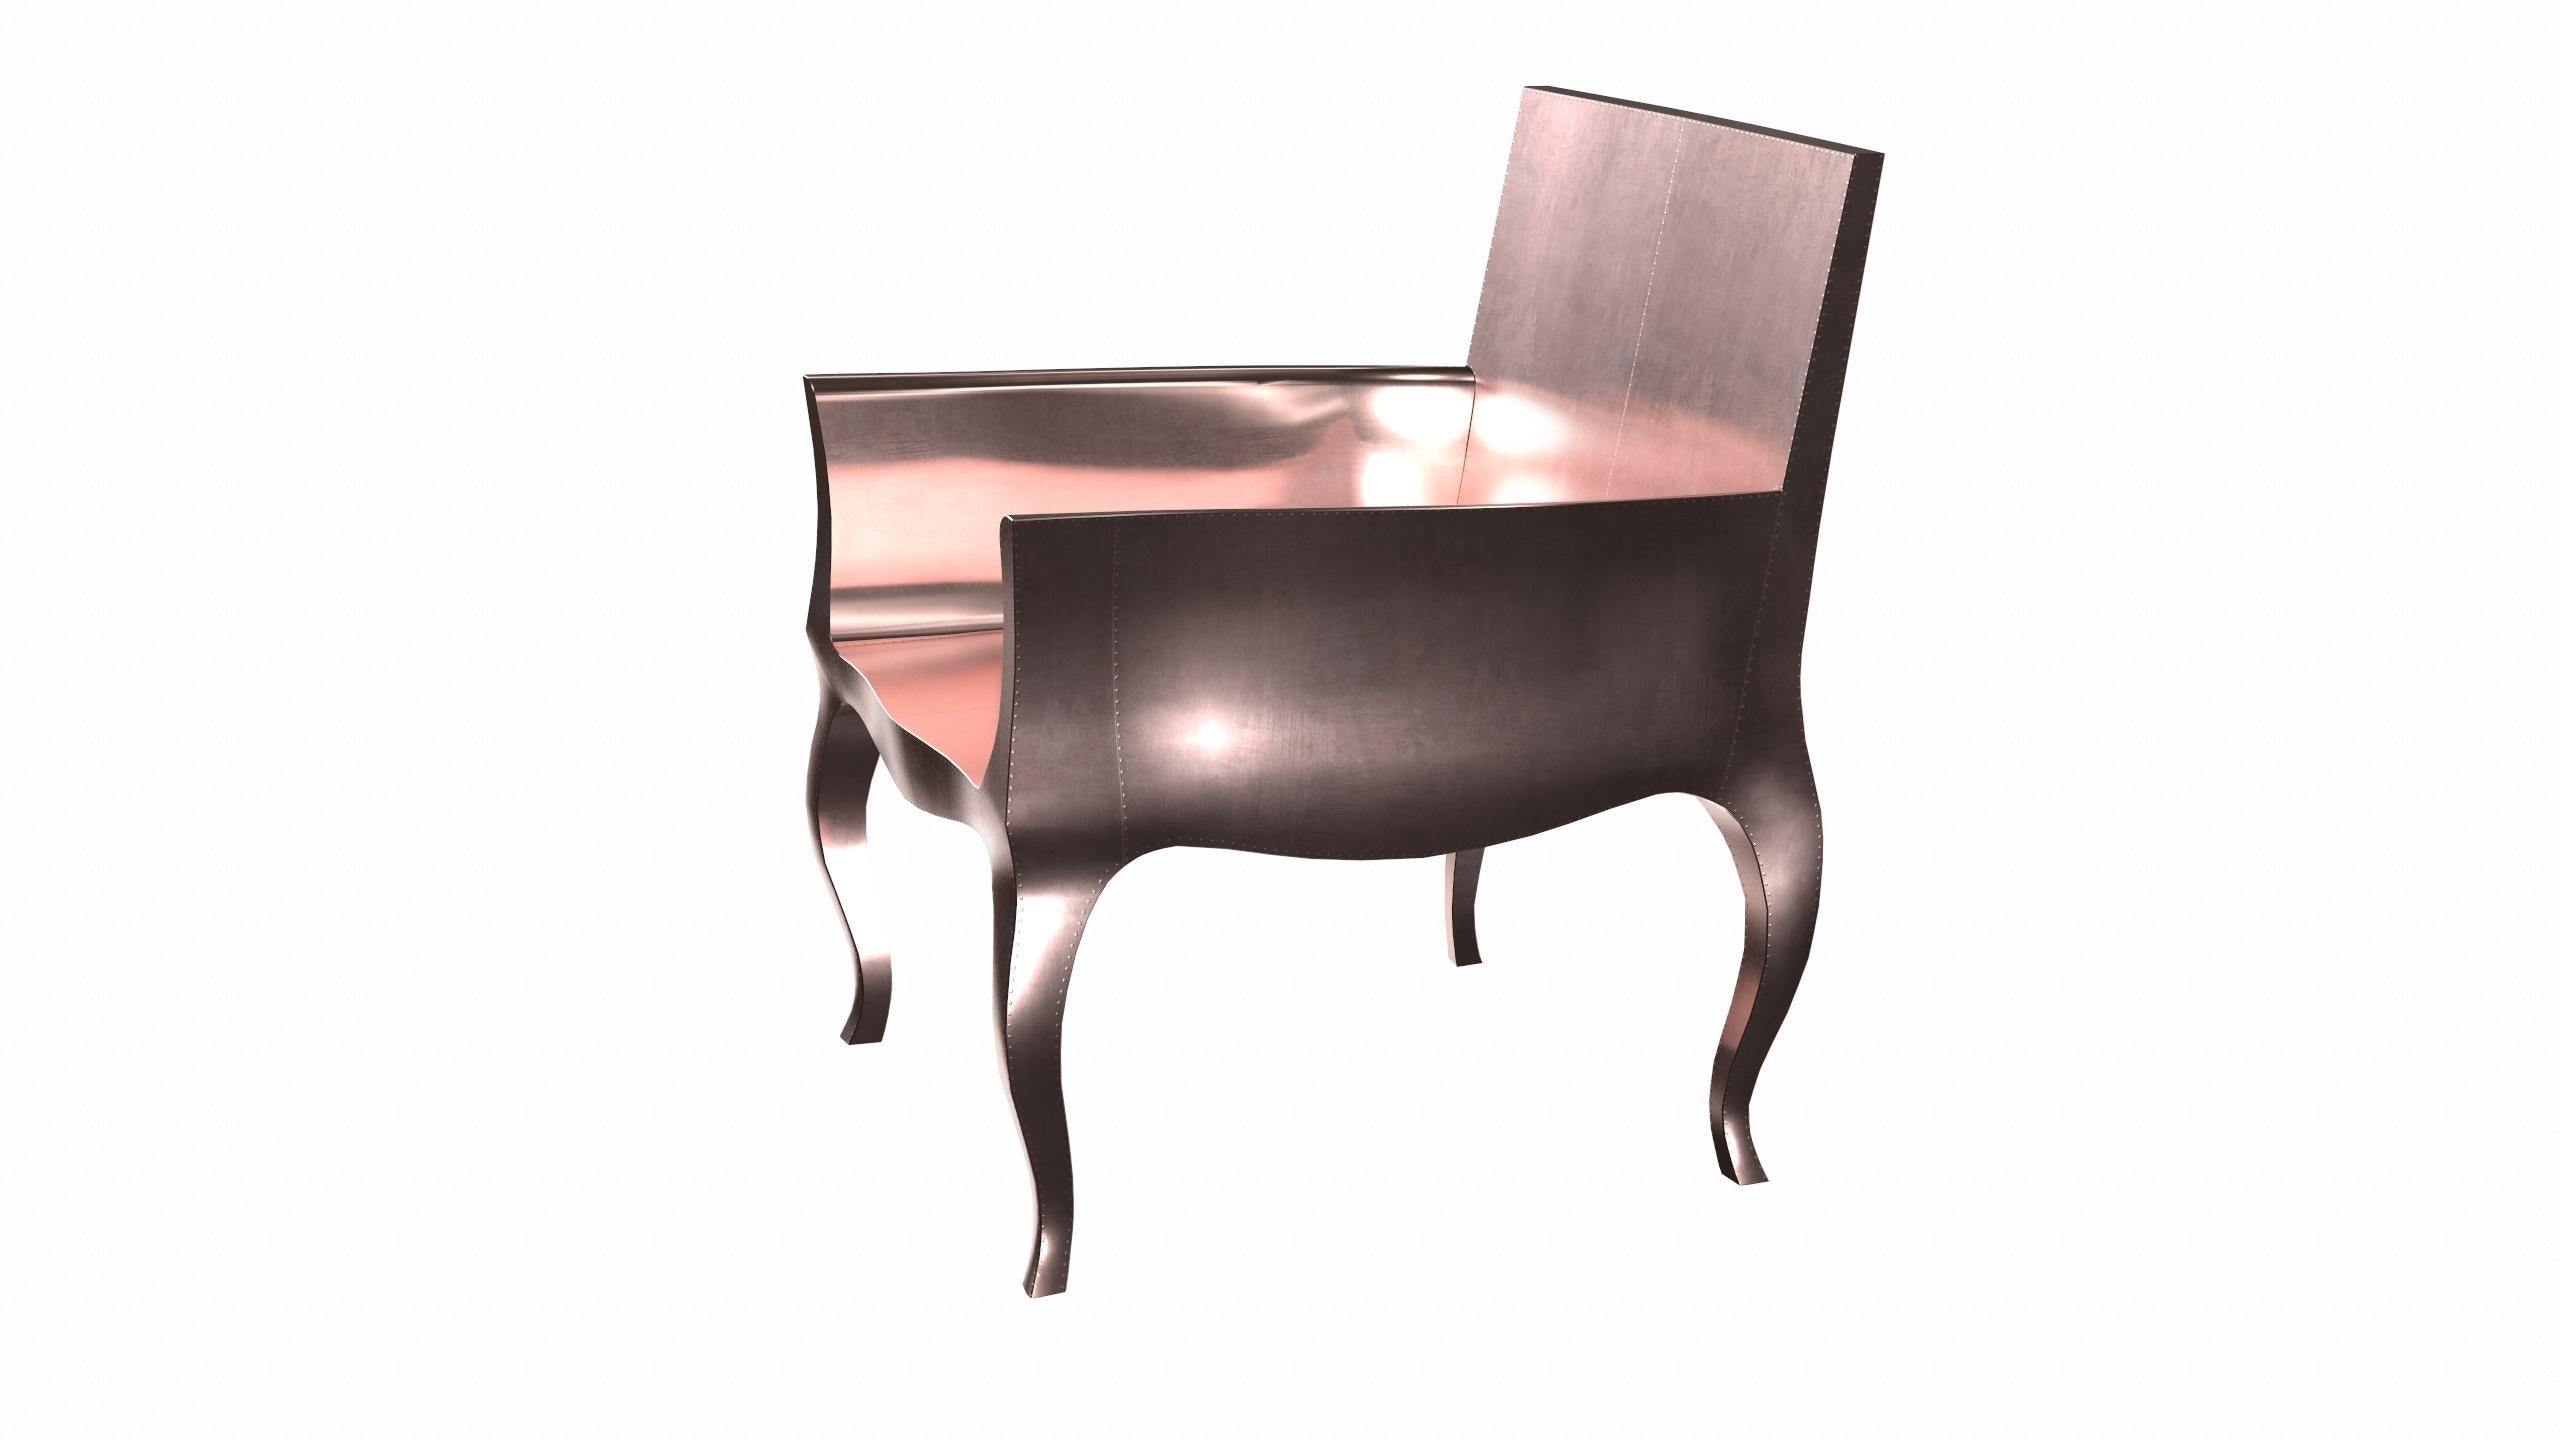 Art Deco Style Chairs in Smooth Copper by Paul Mathieu for S. Odegard For Sale 1